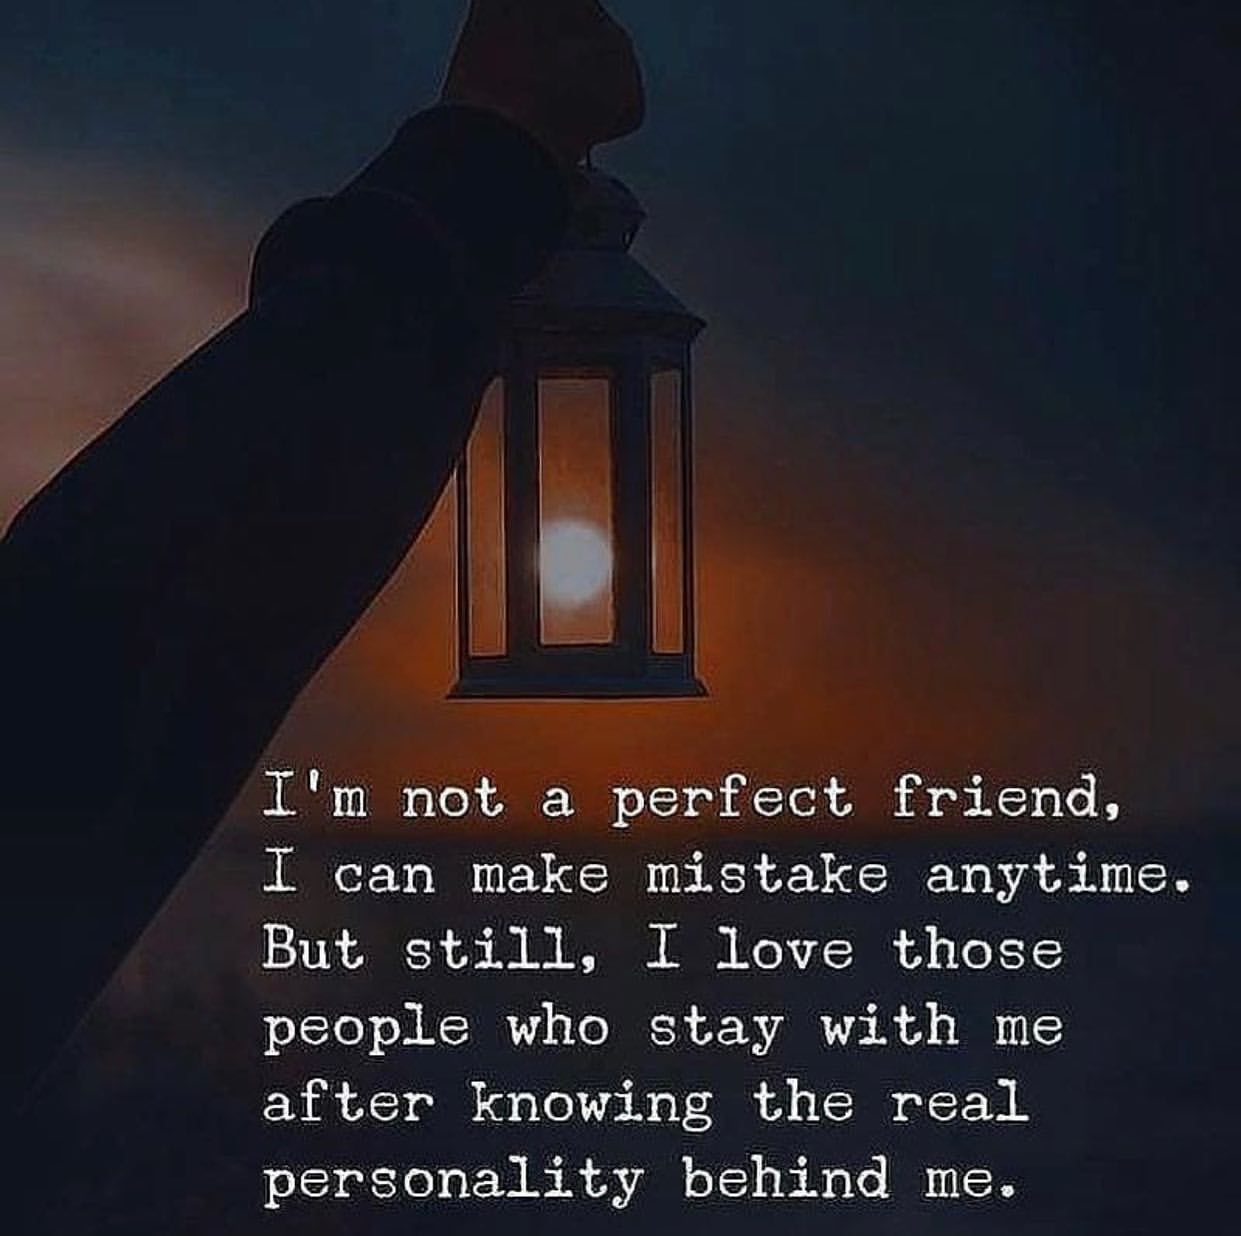 I'm not a perfect friend, I can make mistake anytime. But still, I love those people who stay with me after knowing the real personality behind me.